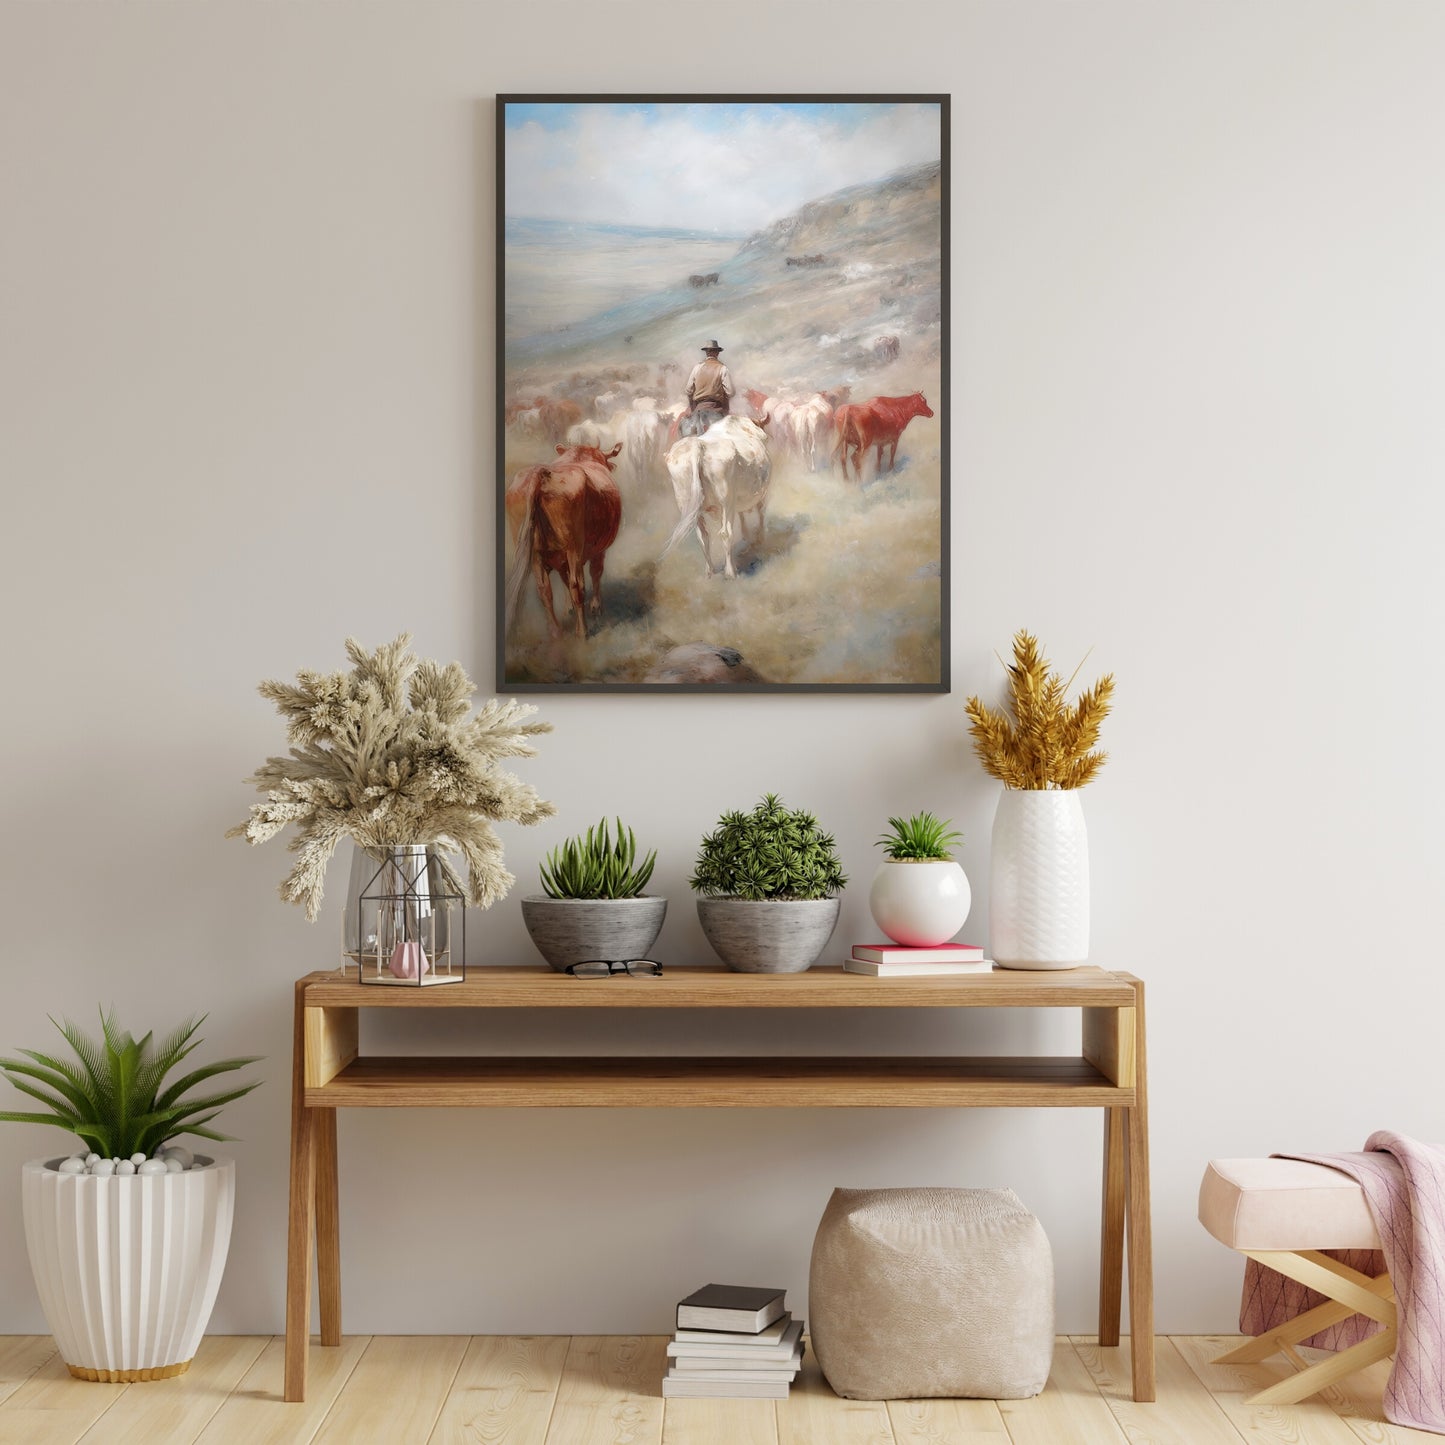 Vintage Wild West Paper Poster Prints Wall Art Cowboy Tending Cattle Herd Down into Valley, Soft Pale Colors, Wild West Art